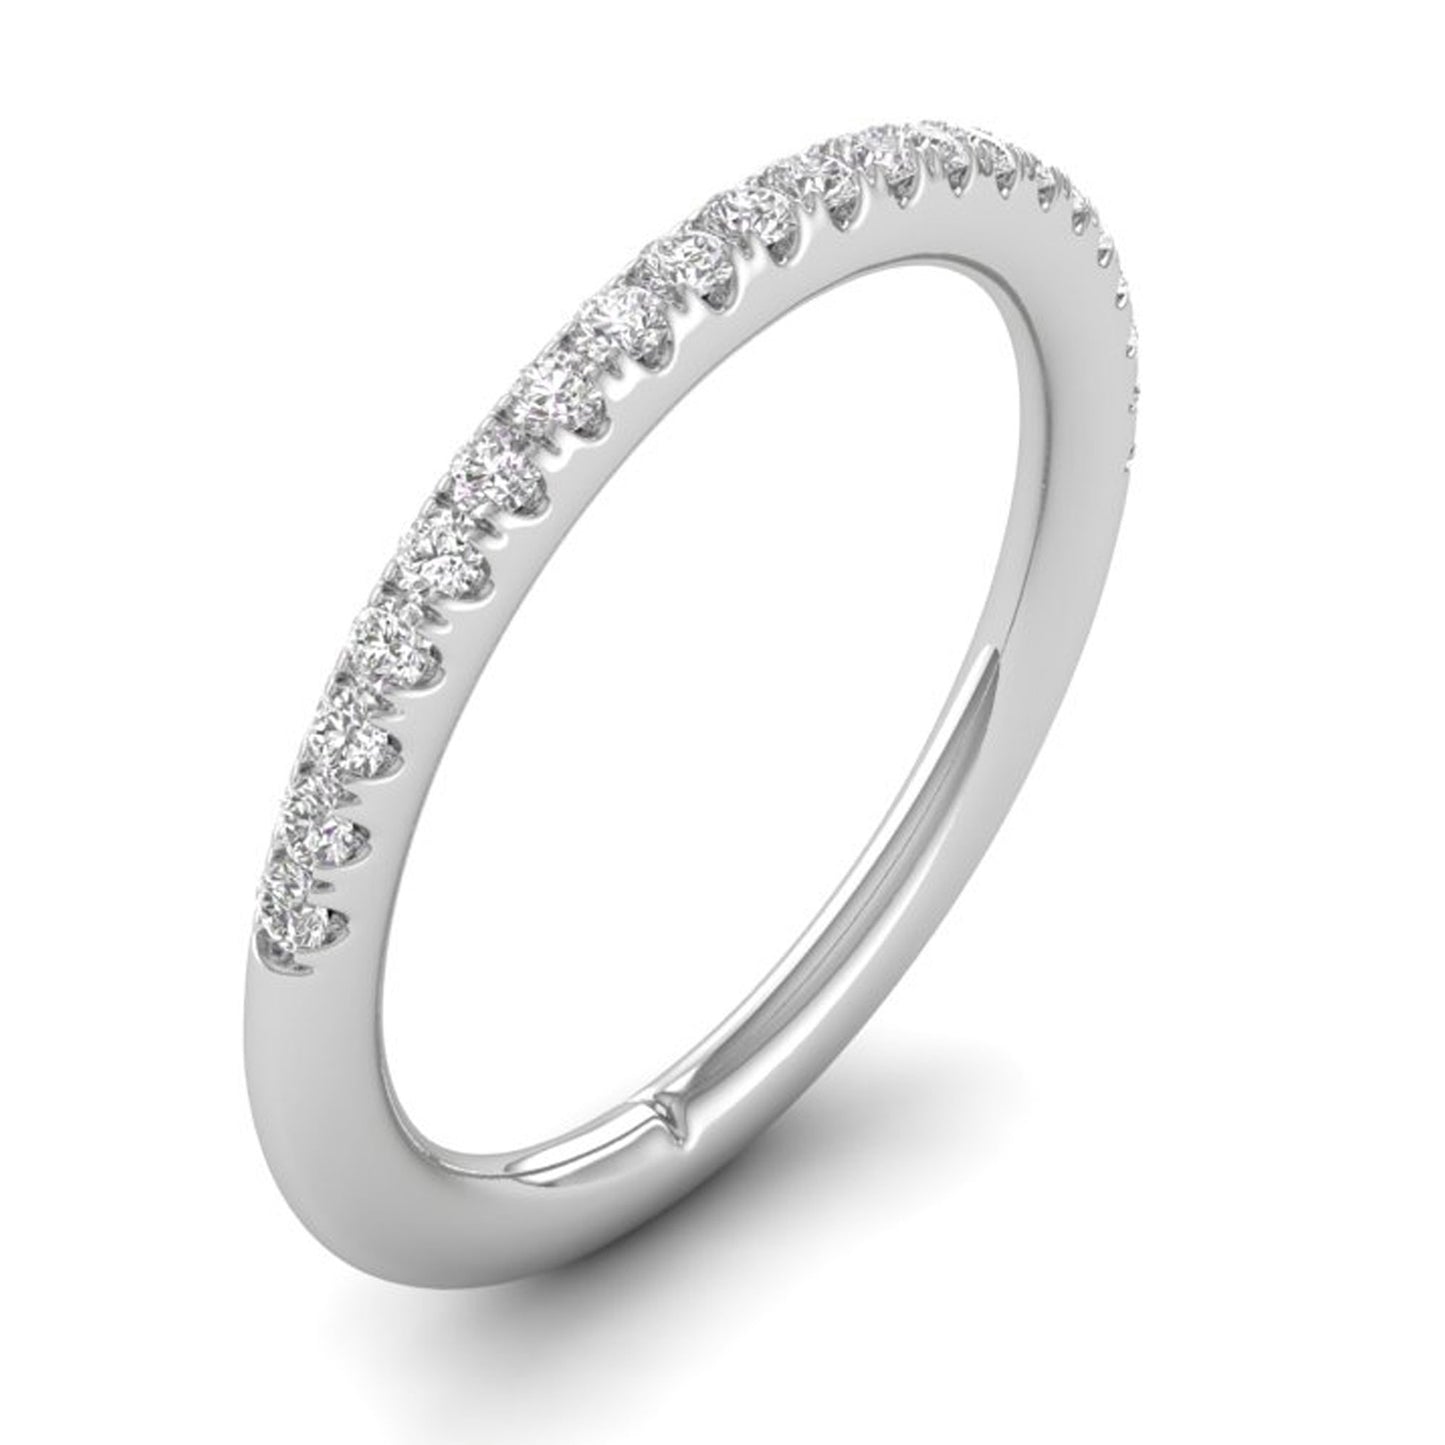 1/4 CTW COLORLESS FLAWLESS FRENCH PAVE WEDDING BAND